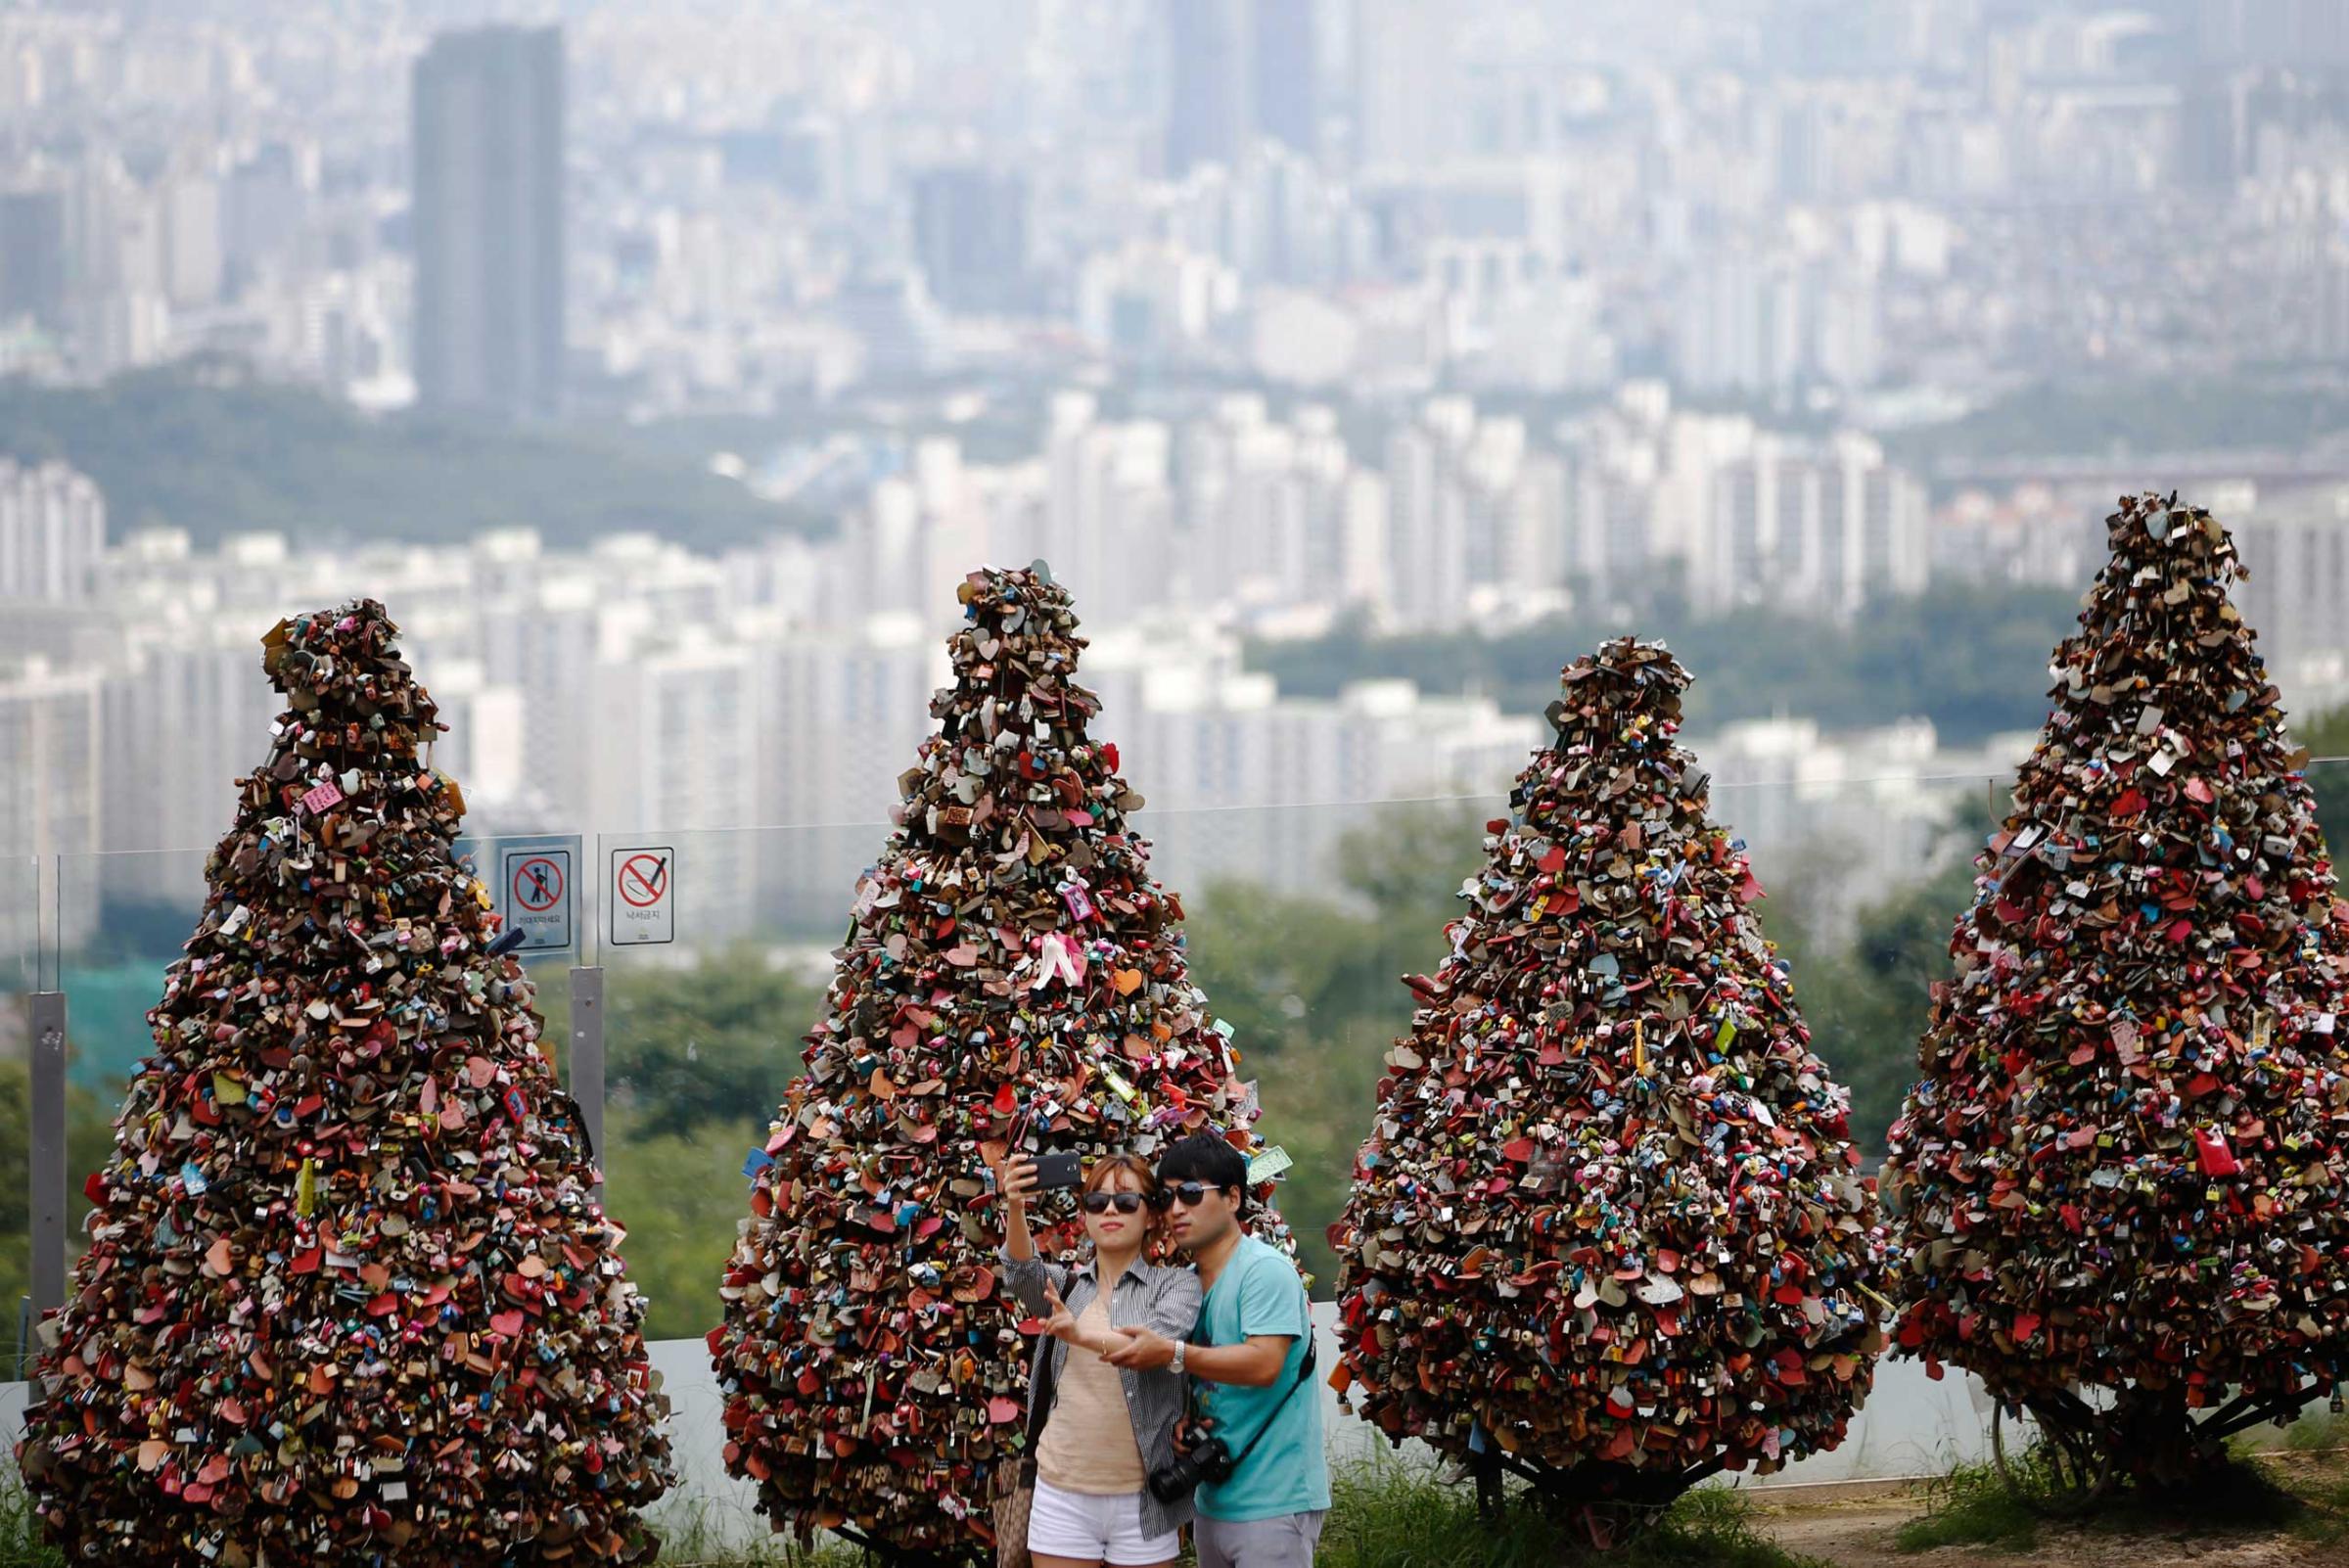 Couple takes a selfie in front of trees covered with "love locks" at N Seoul Tower located atop Mt. Namsan in central Seoul